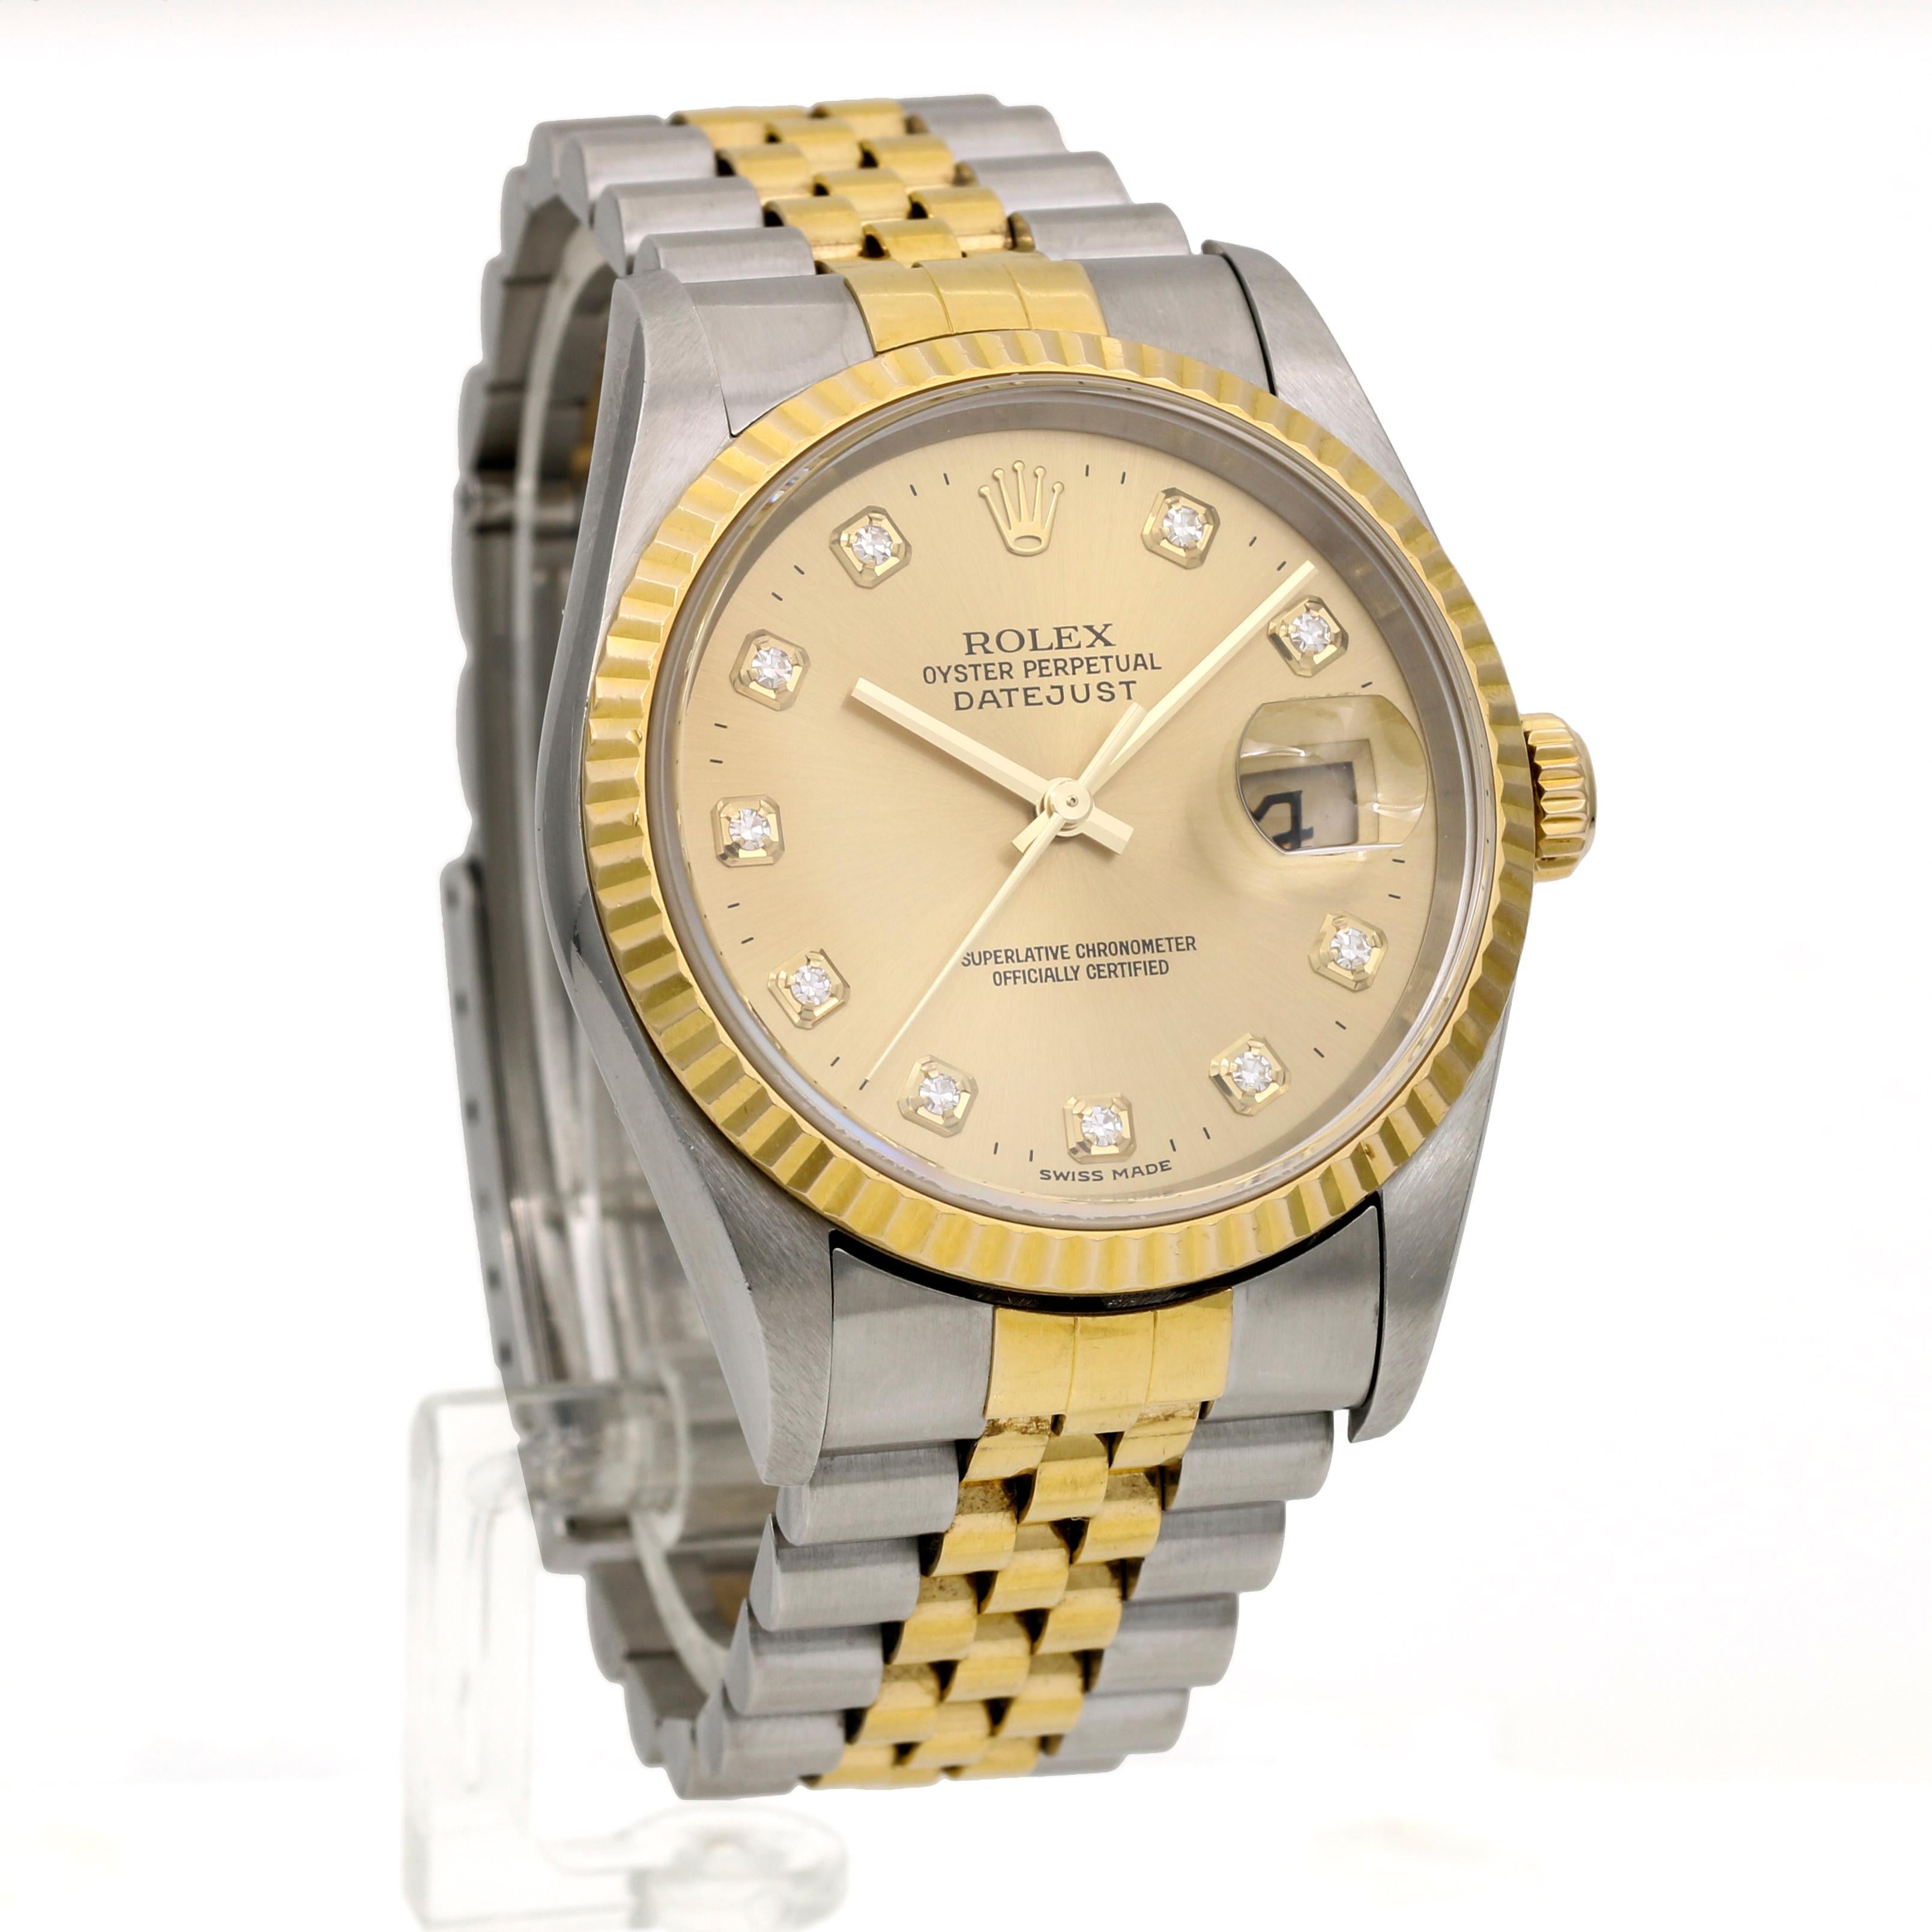 Experience the timeless elegance of this exquisite Rolex Datejust watch, crafted from stainless steel and 18-karat yellow gold and featuring a dazzling factory diamond dial. This watch exudes luxury and sophistic with a polished and brushed finished